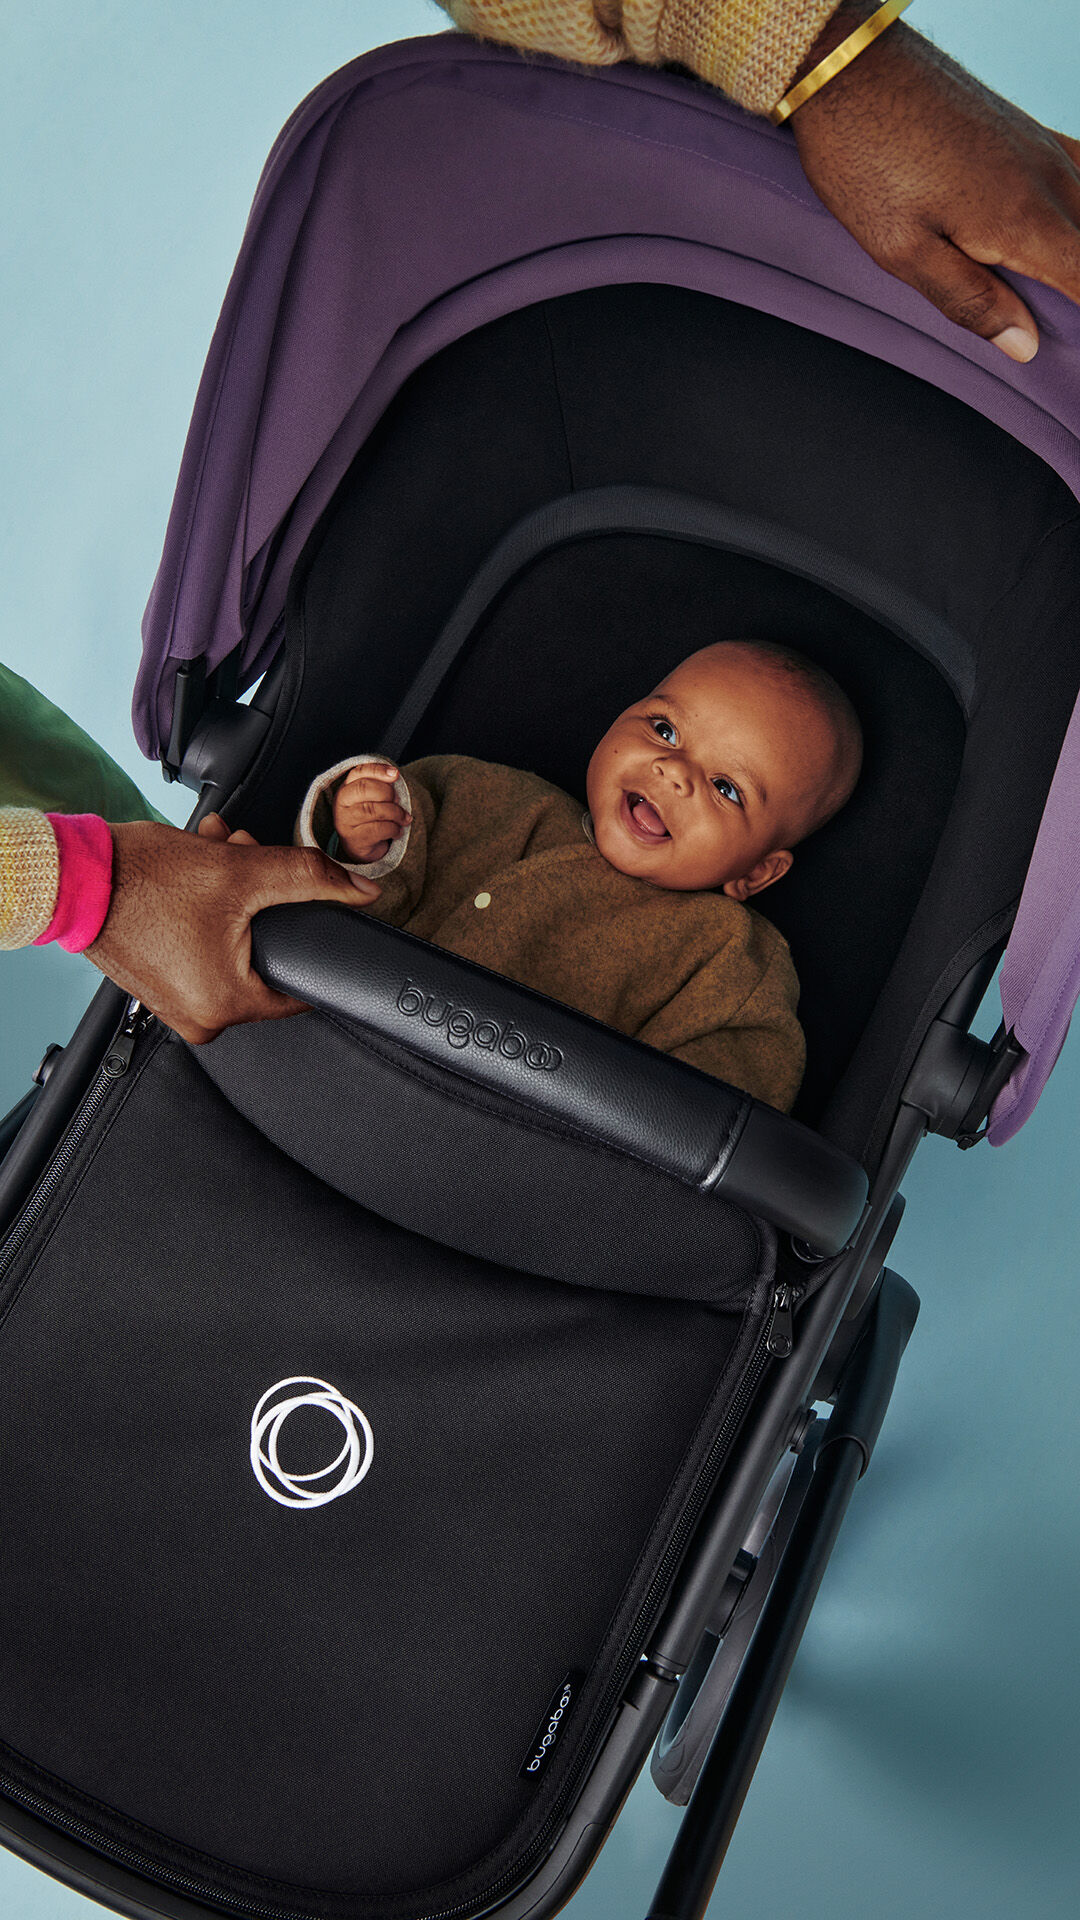 Find a stroller for any adventure